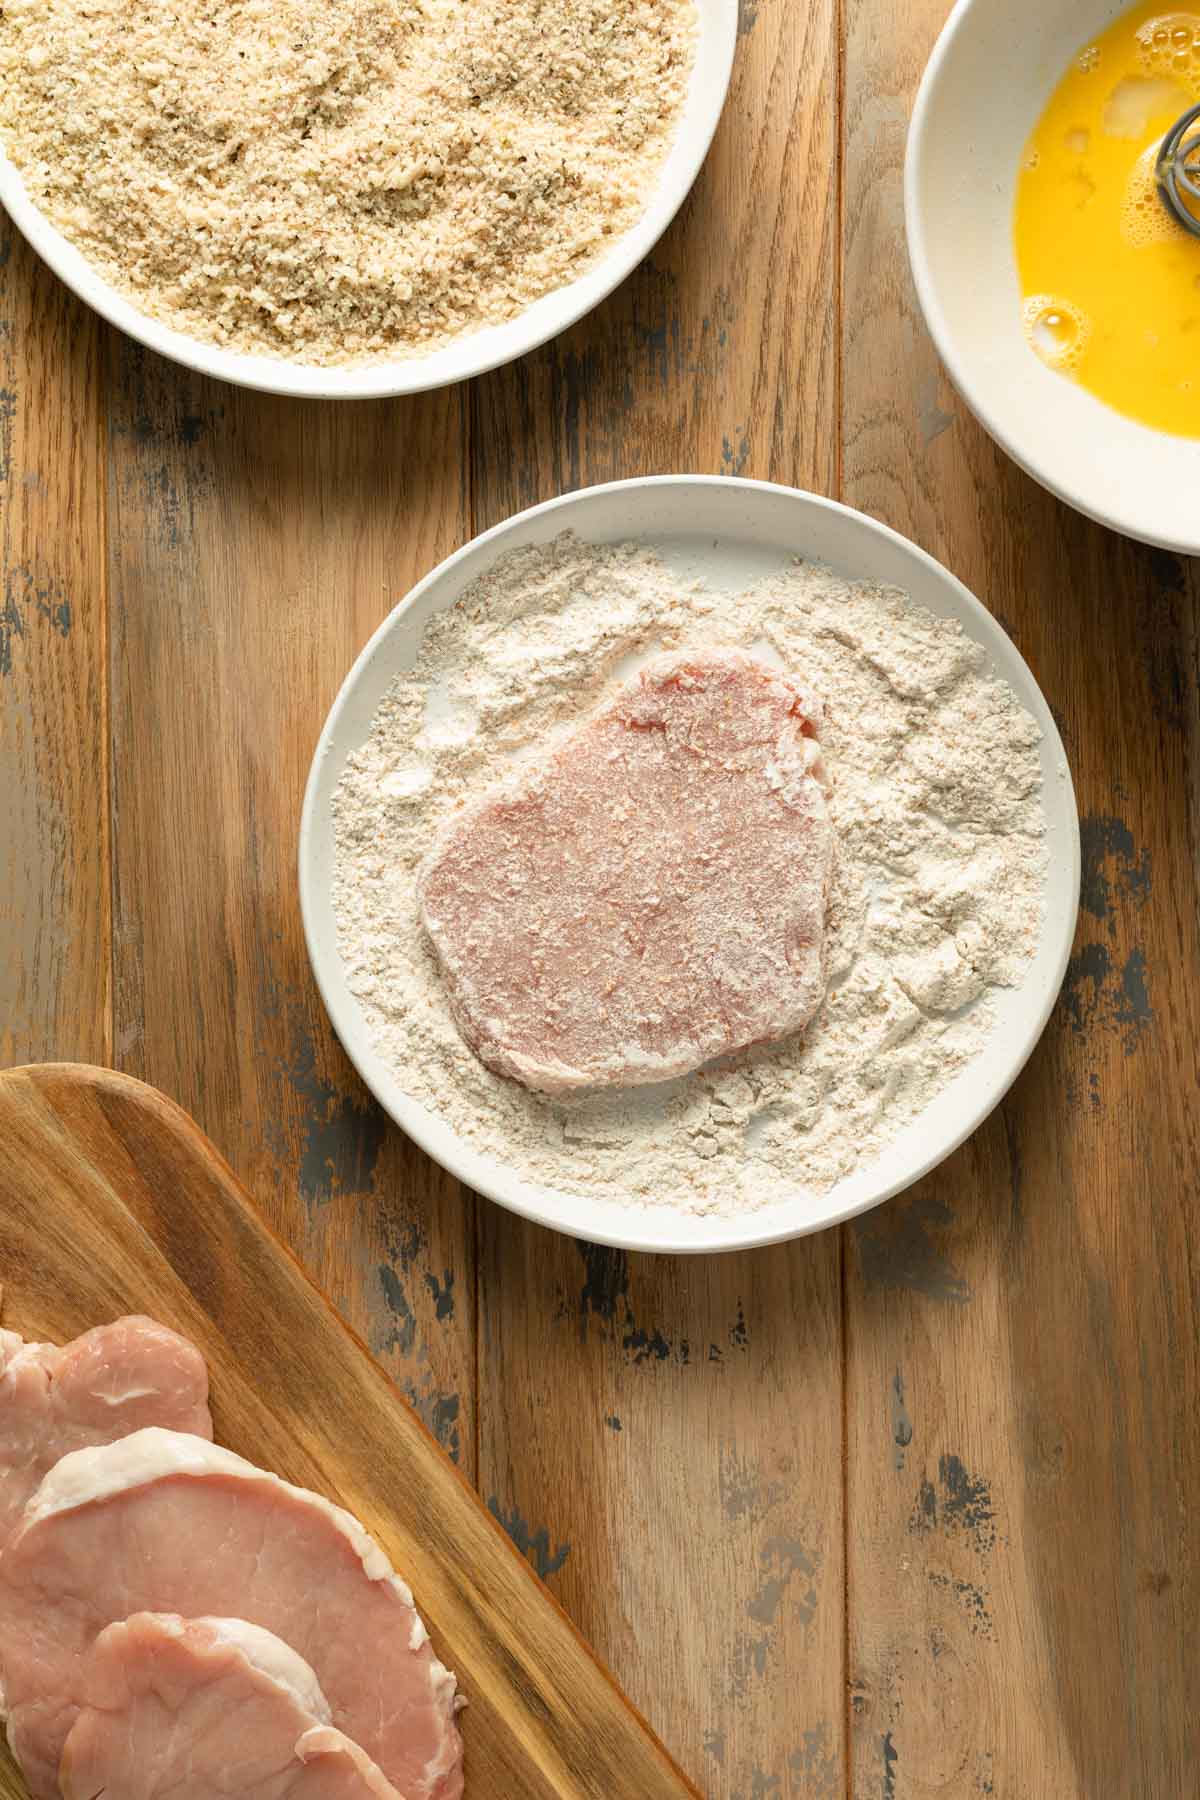 A pork cutlet coated in flour on a plate.